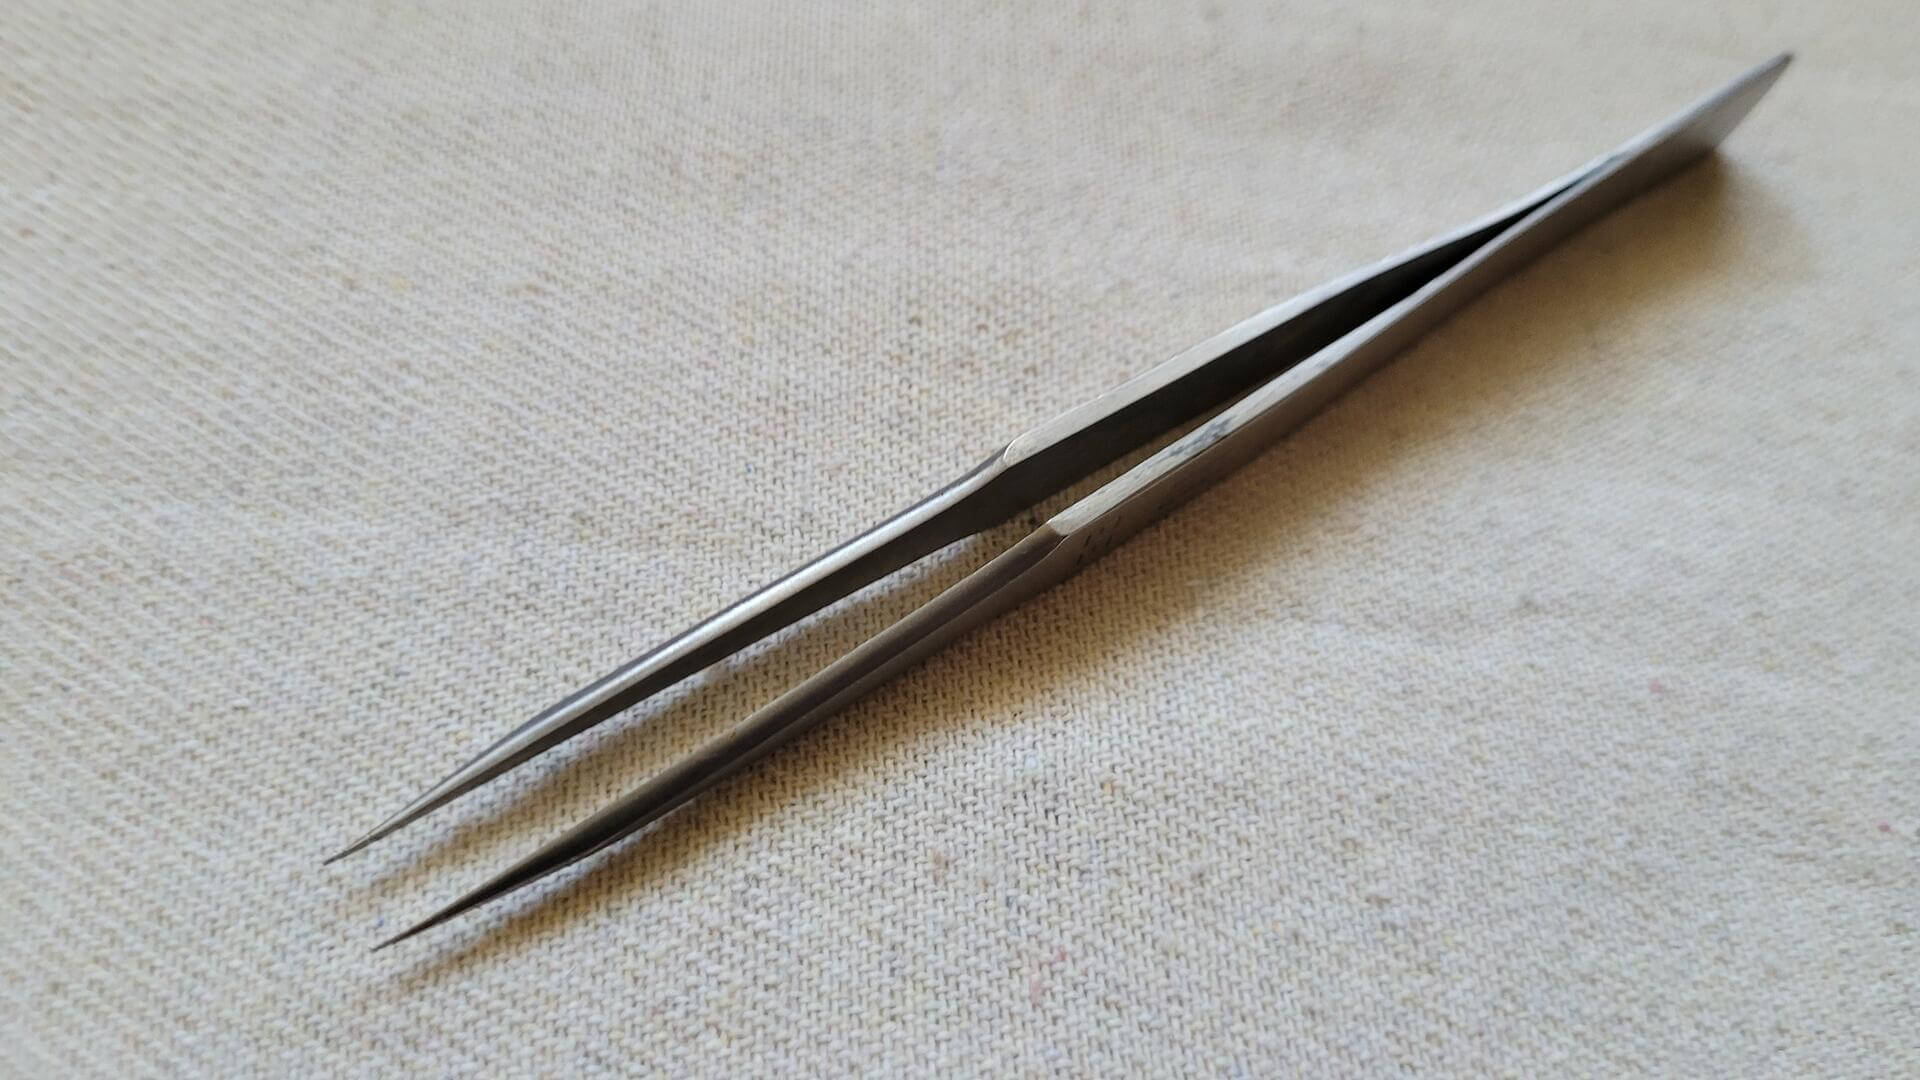 dumont-and-fils-watchmaker-fine-tip-tweezers-vintage-and-antique-made-in-switzerland-quality-jewelry-and-watchmaking-hand-tool